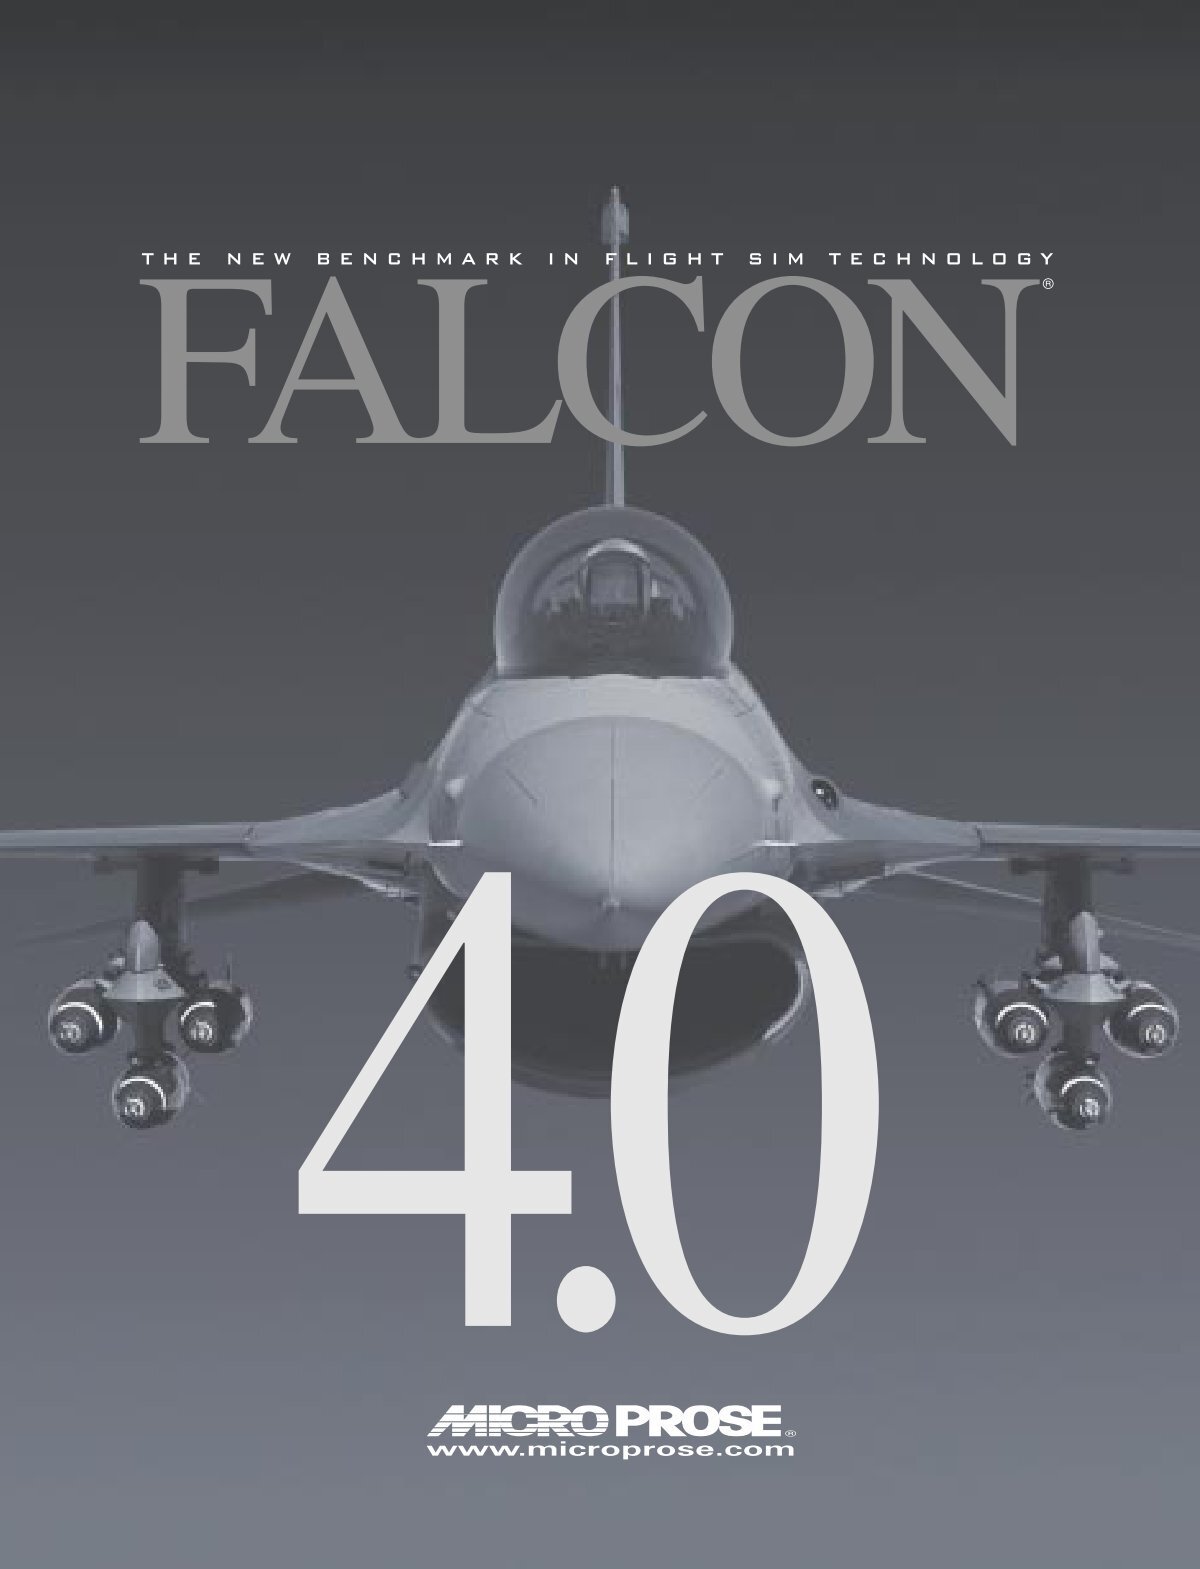 Falcon's high-speed dive generates forces needed to catch agile